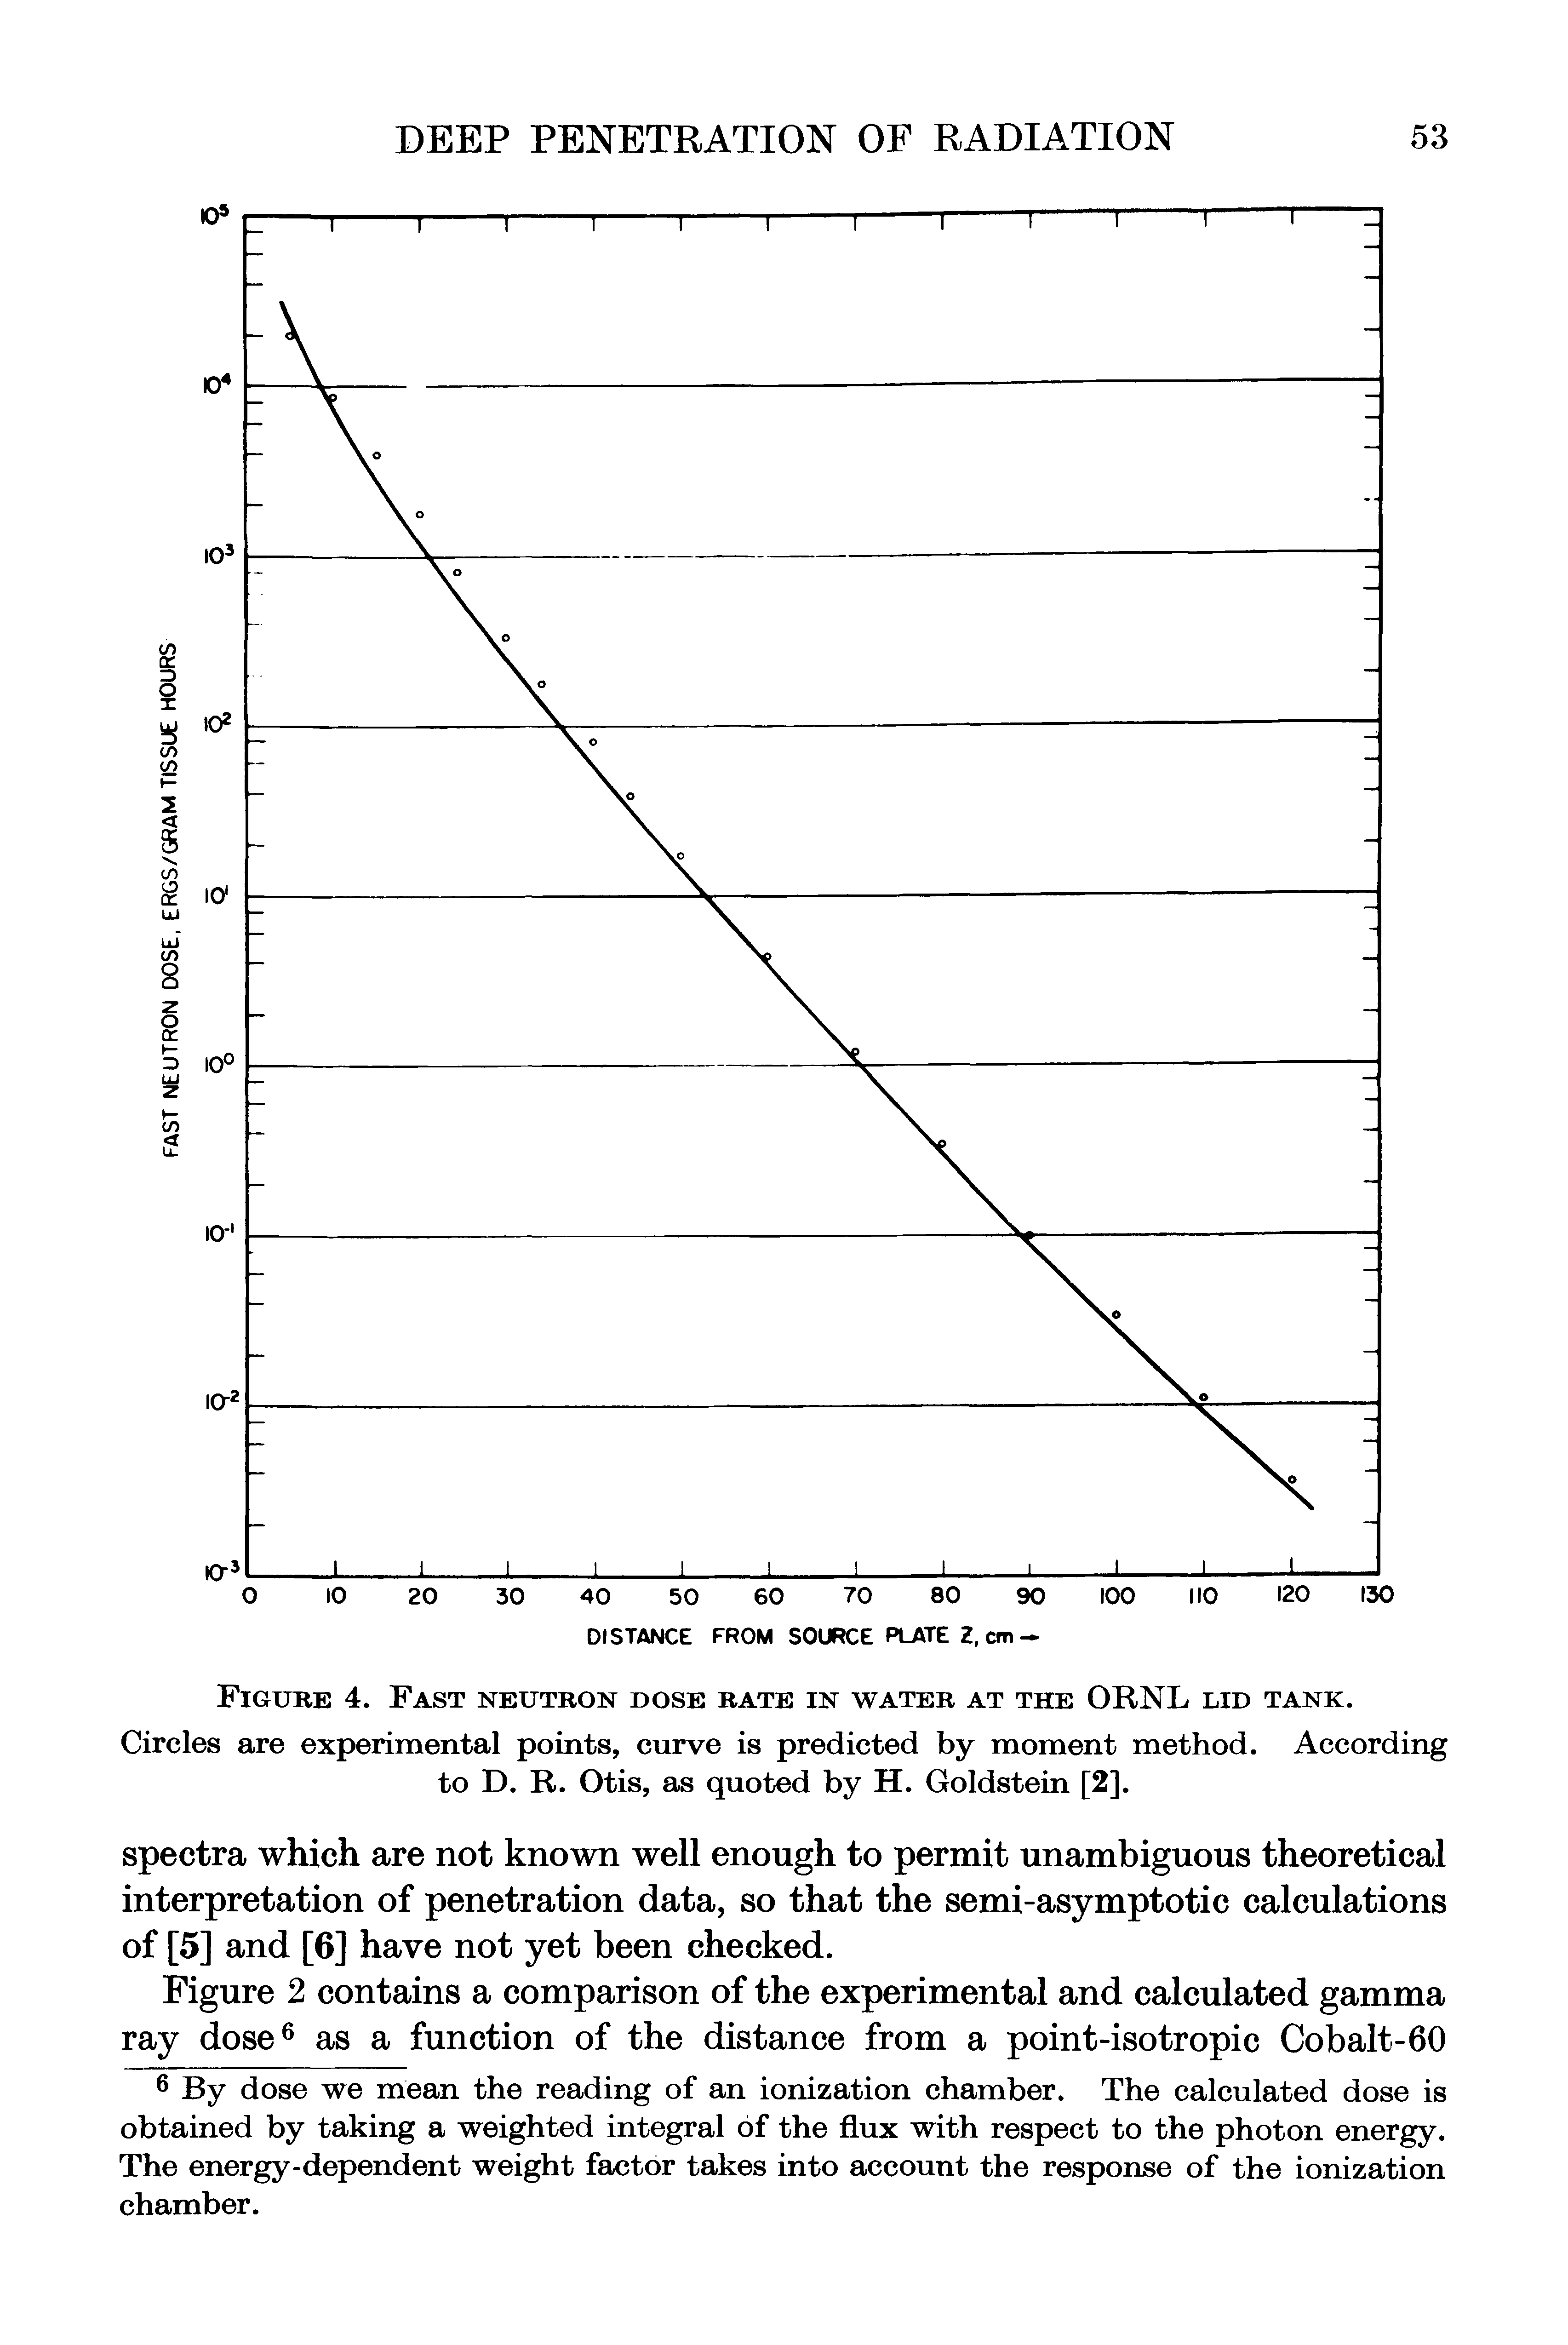 Figure 4. Fast neutron dose rate in water at the ORNL lid tank. Circles are experimental points, curve is predicted by moment method. According to D. R. Otis, as quoted by H. Goldstein [2].